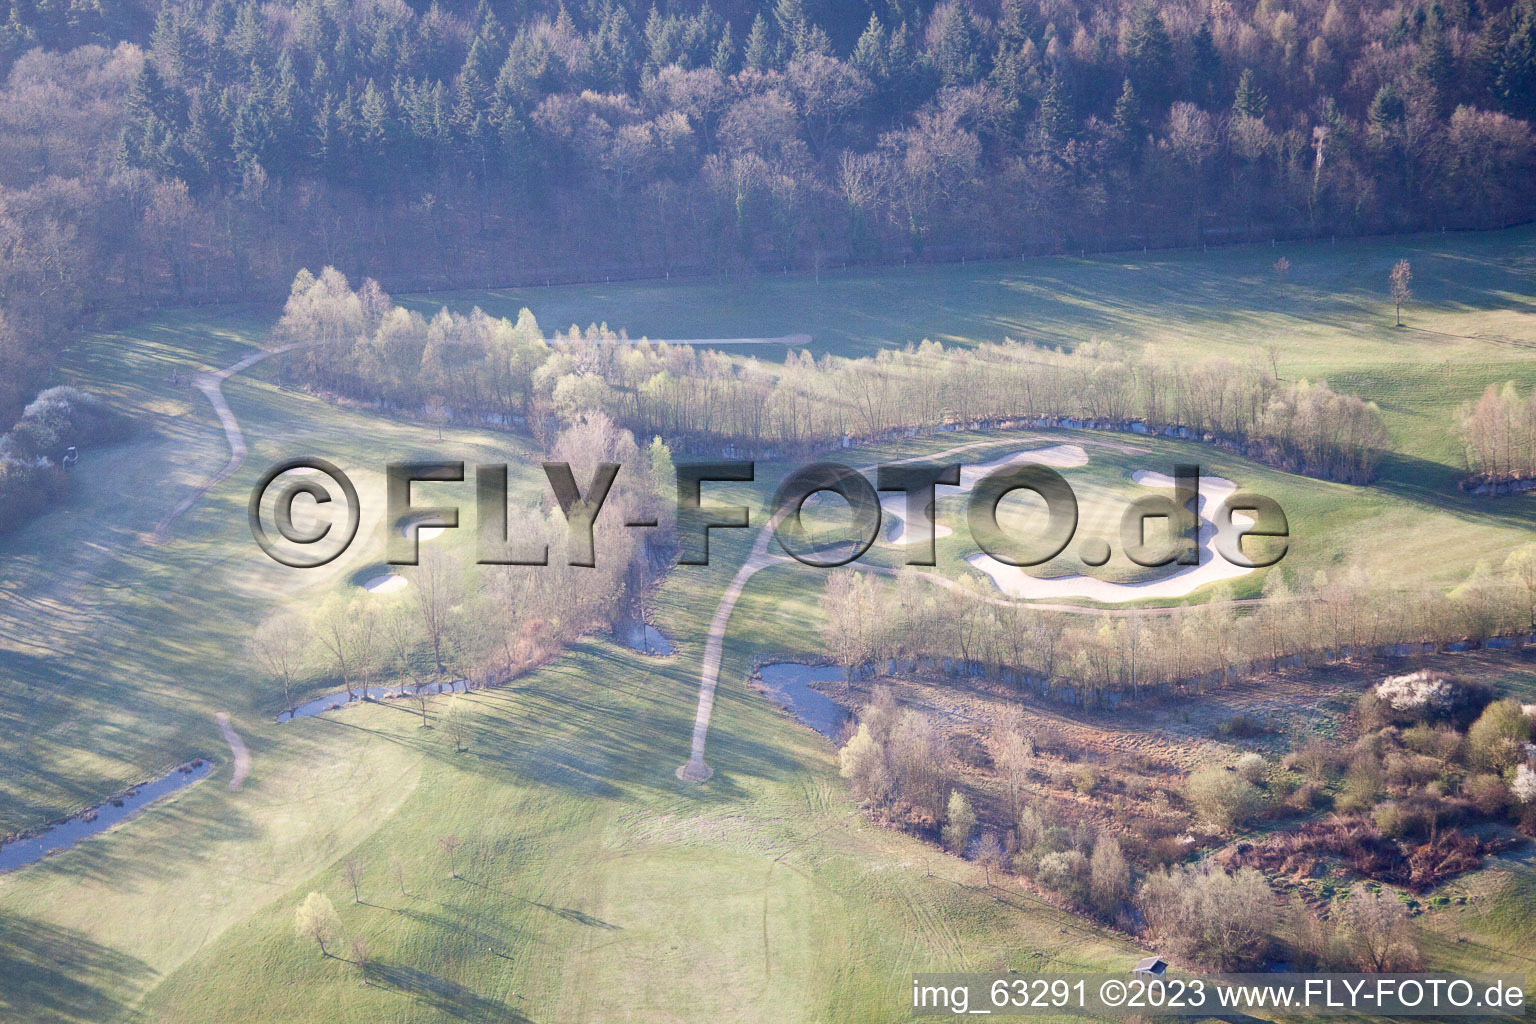 Dreihof Golf Club in Essingen in the state Rhineland-Palatinate, Germany from above